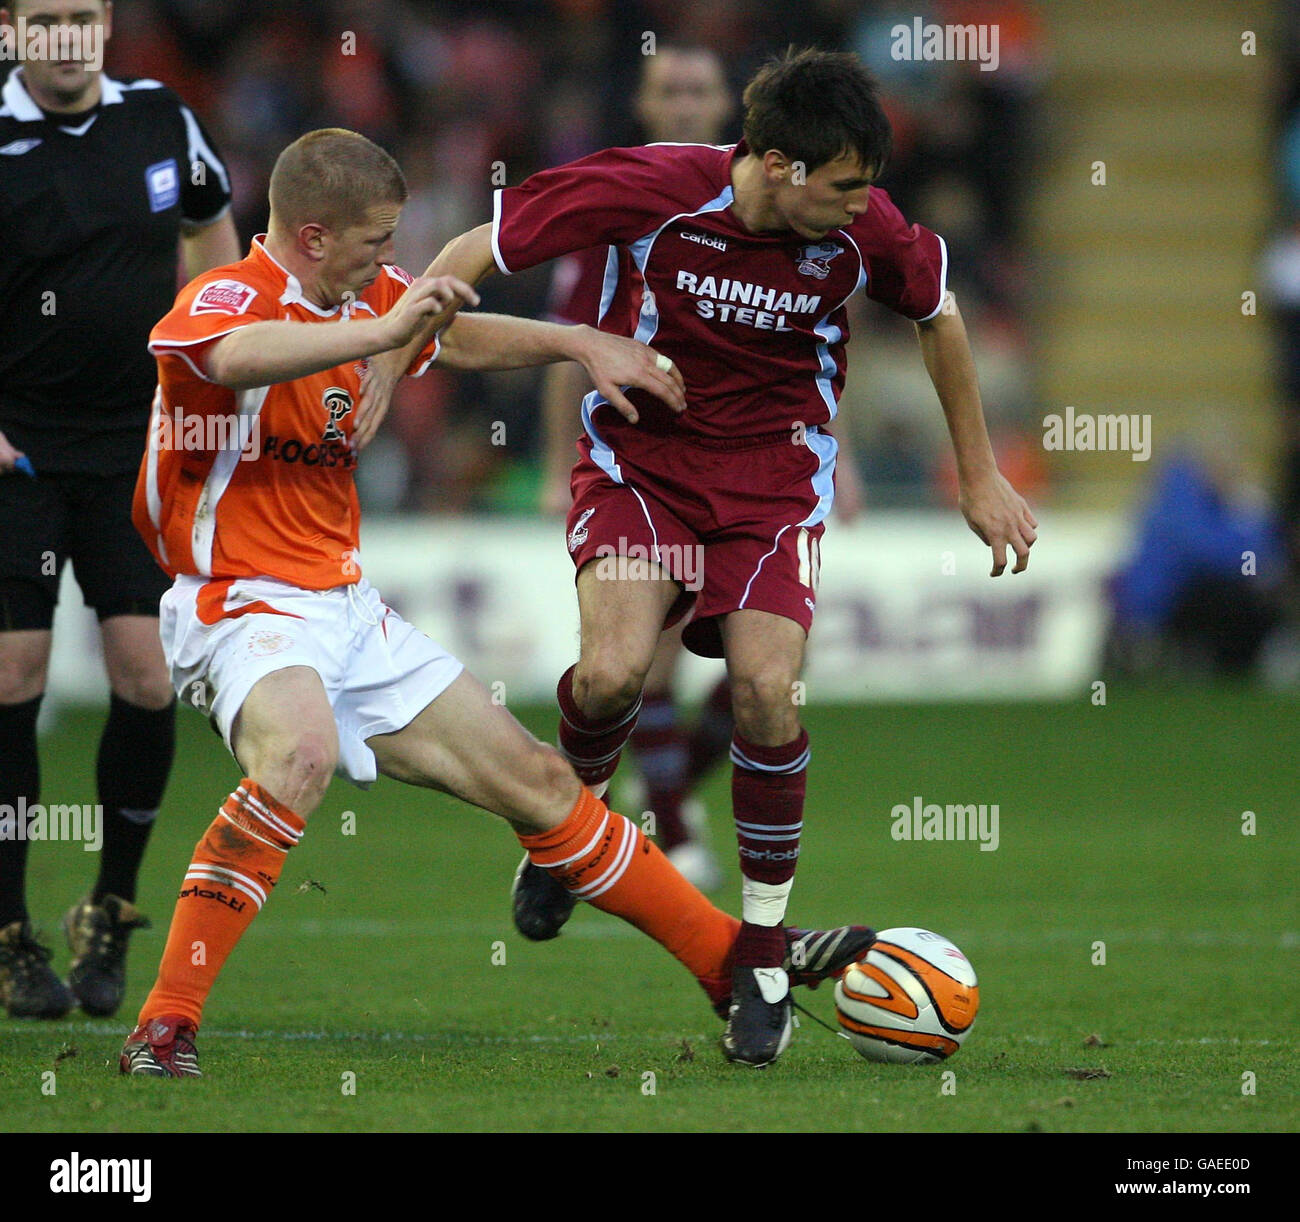 Blackpool's Keith Southern and Scunthorpe United's Jack Cork during the Coca-Cola Football League Championship match at Bloomfield Road, Blackpool. Stock Photo